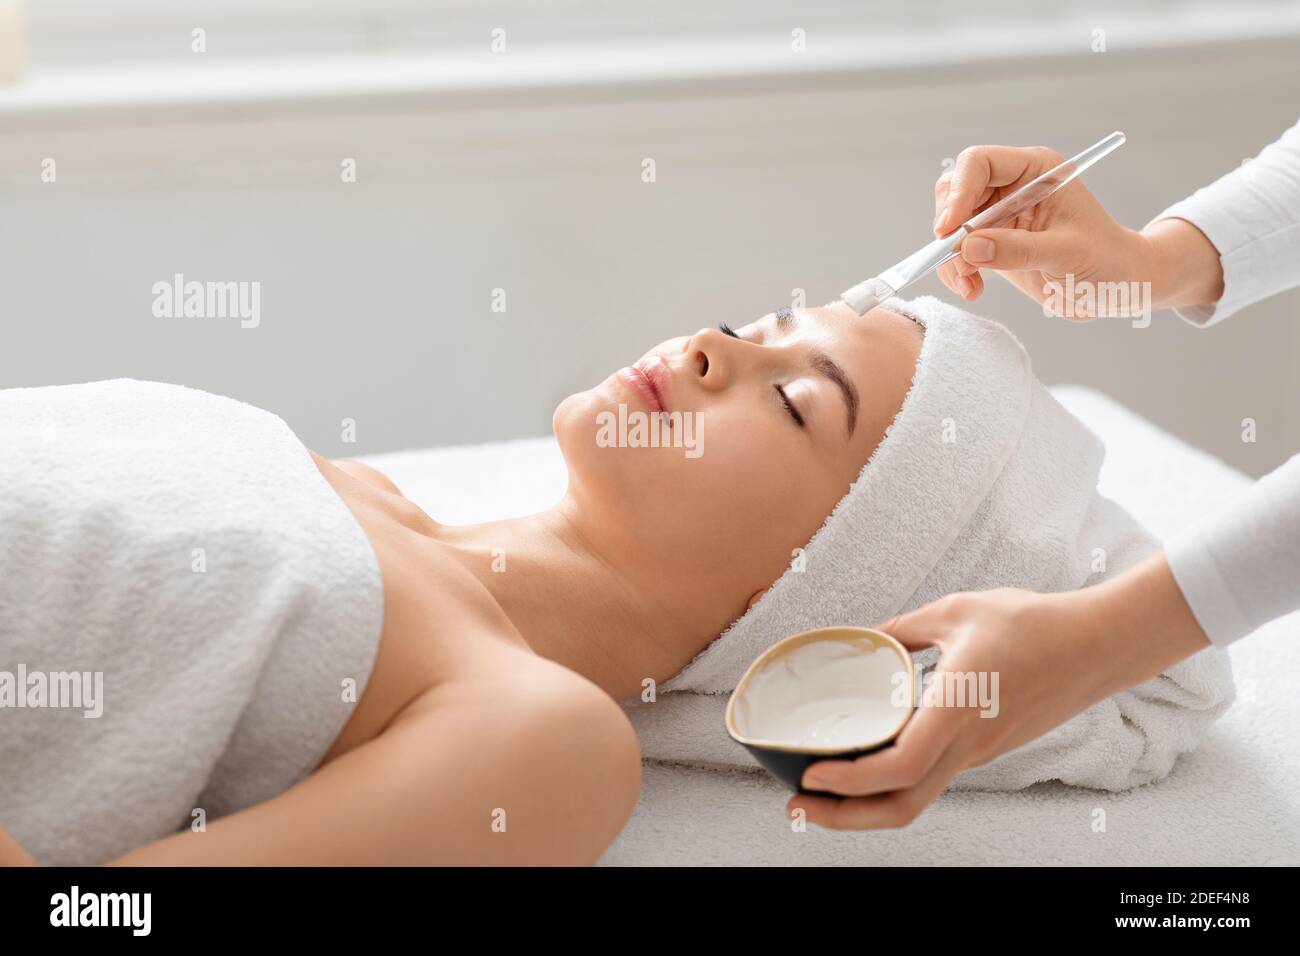 Unrecognizable spa attendant applying clay mask on sleeping lady face Stock Photo